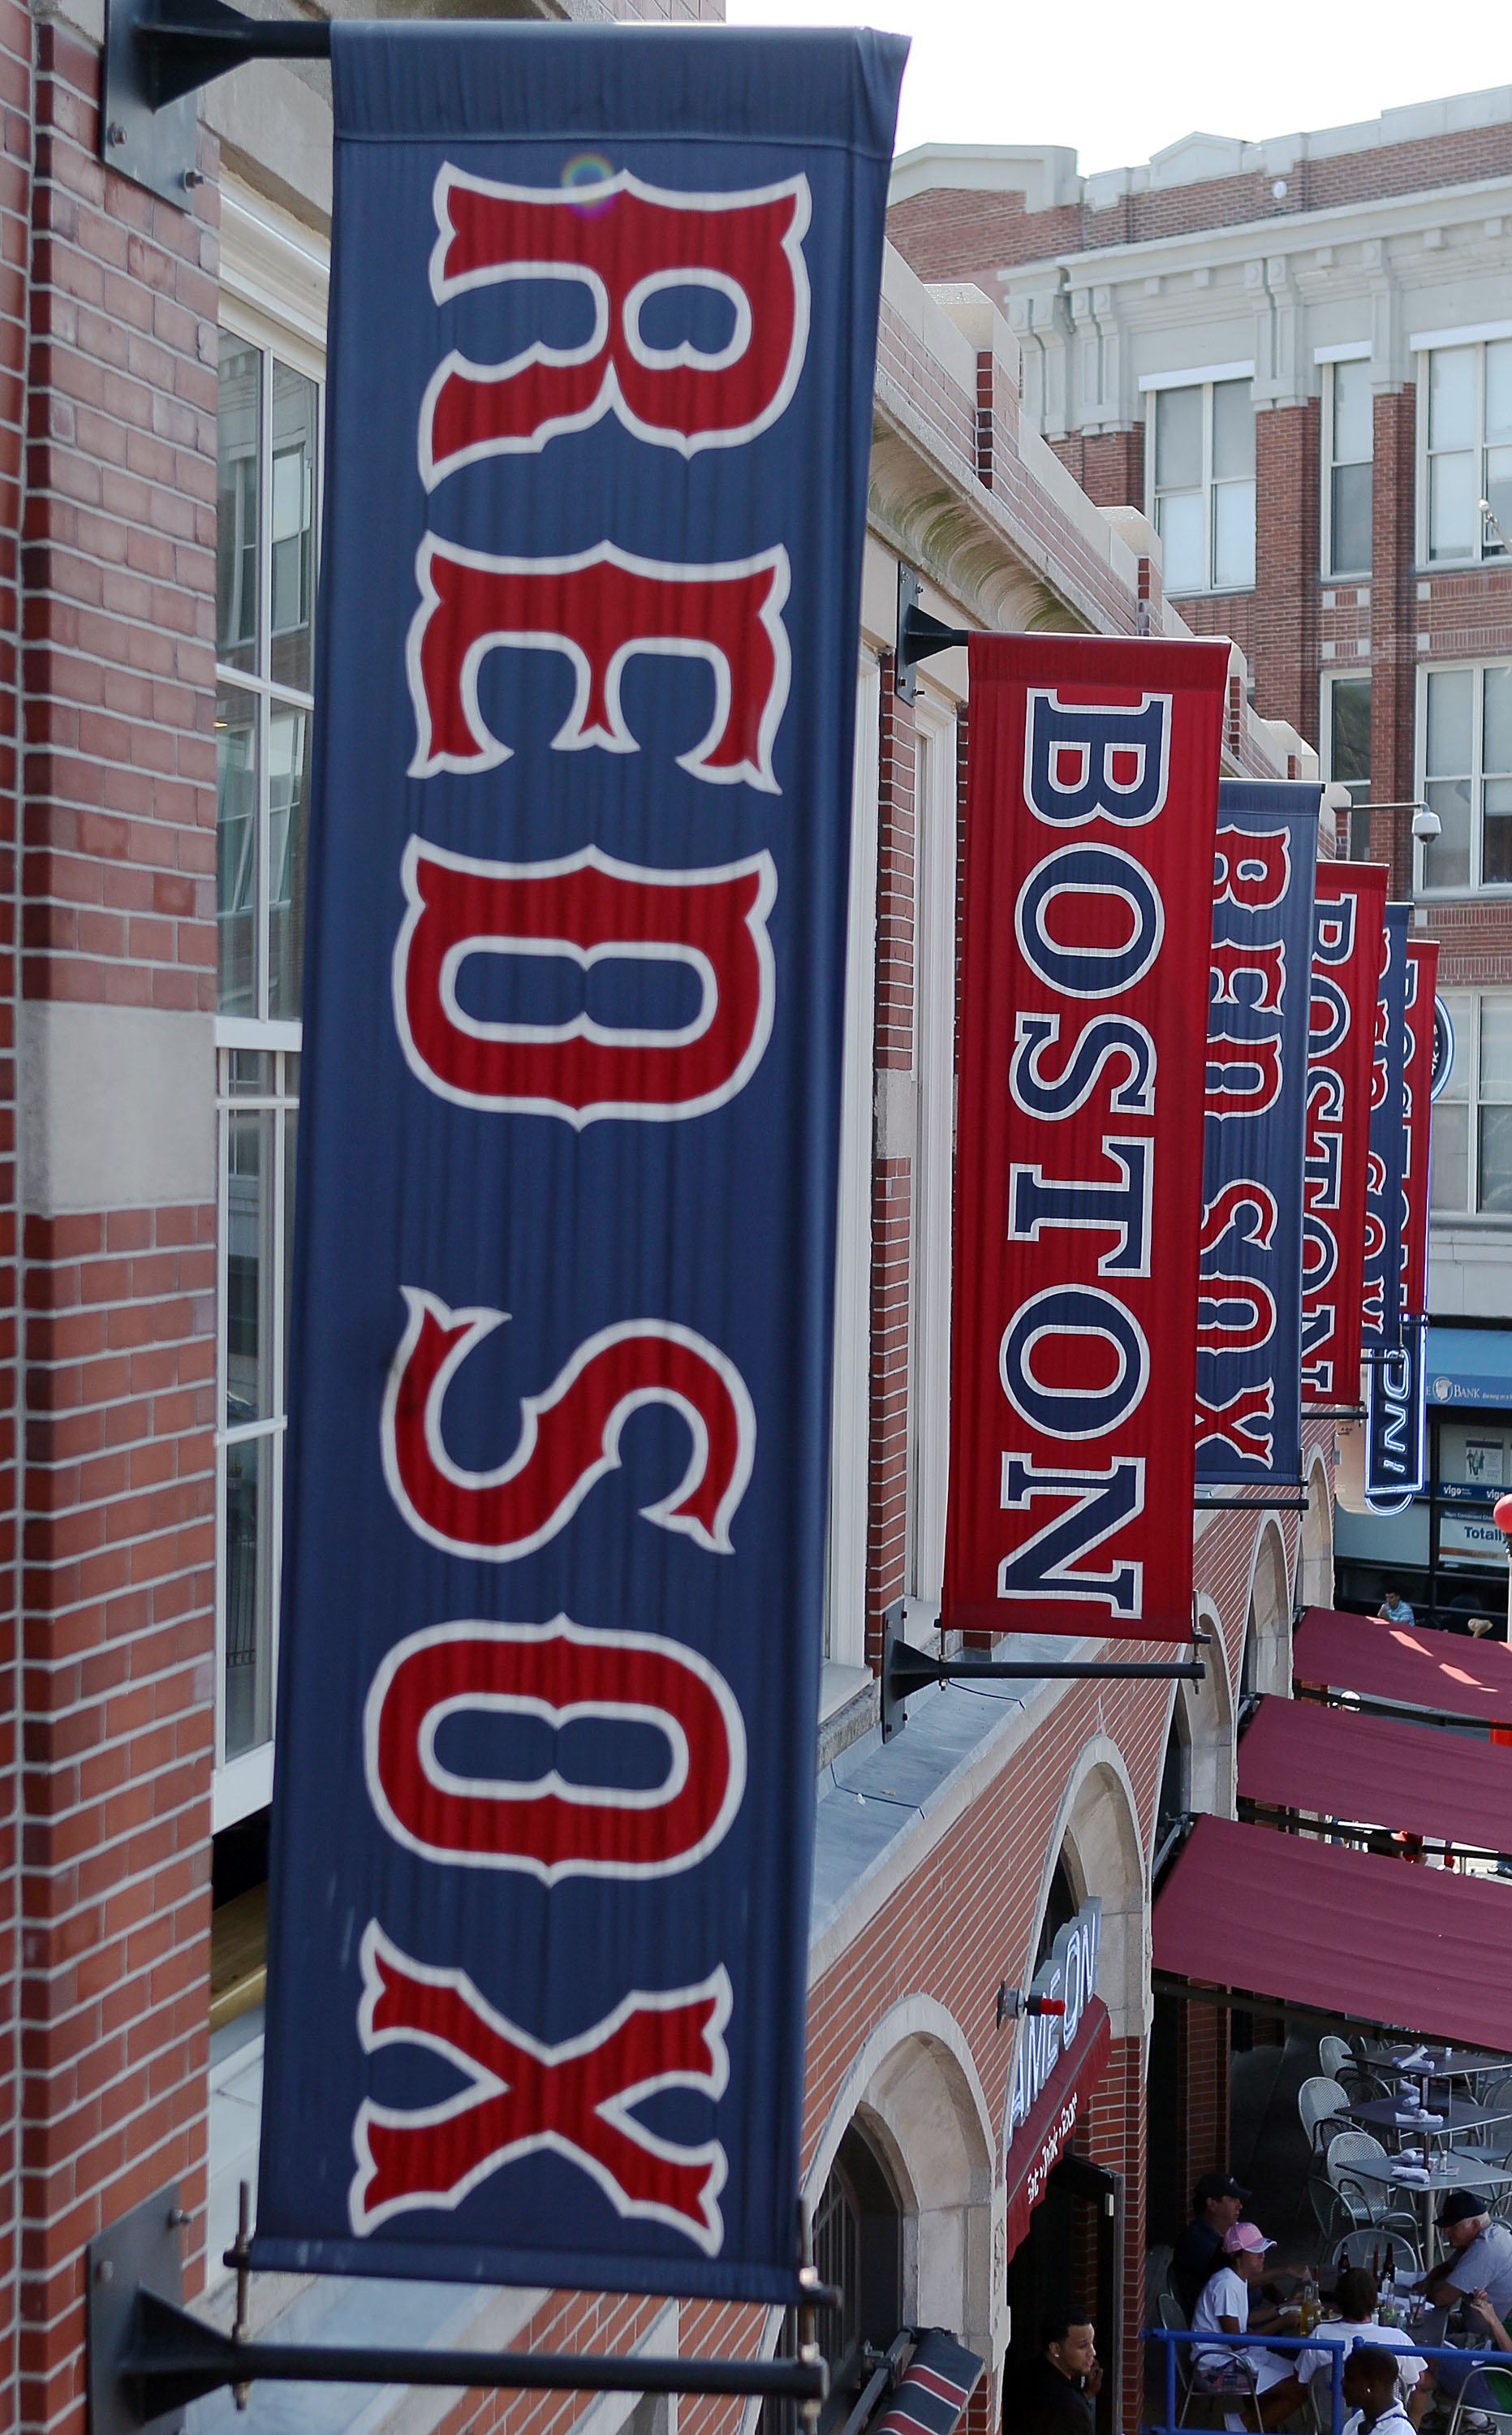 BOSTON - AUGUST 01:  Banners line the outside of the stadium as the Boston Red Sox take on the Detroit Tigers on August 1, 2010 at Fenway Park in Boston, Massachusetts. The Red Sox defeated the Tigers 4-3.  (Photo by Elsa/Getty Images)